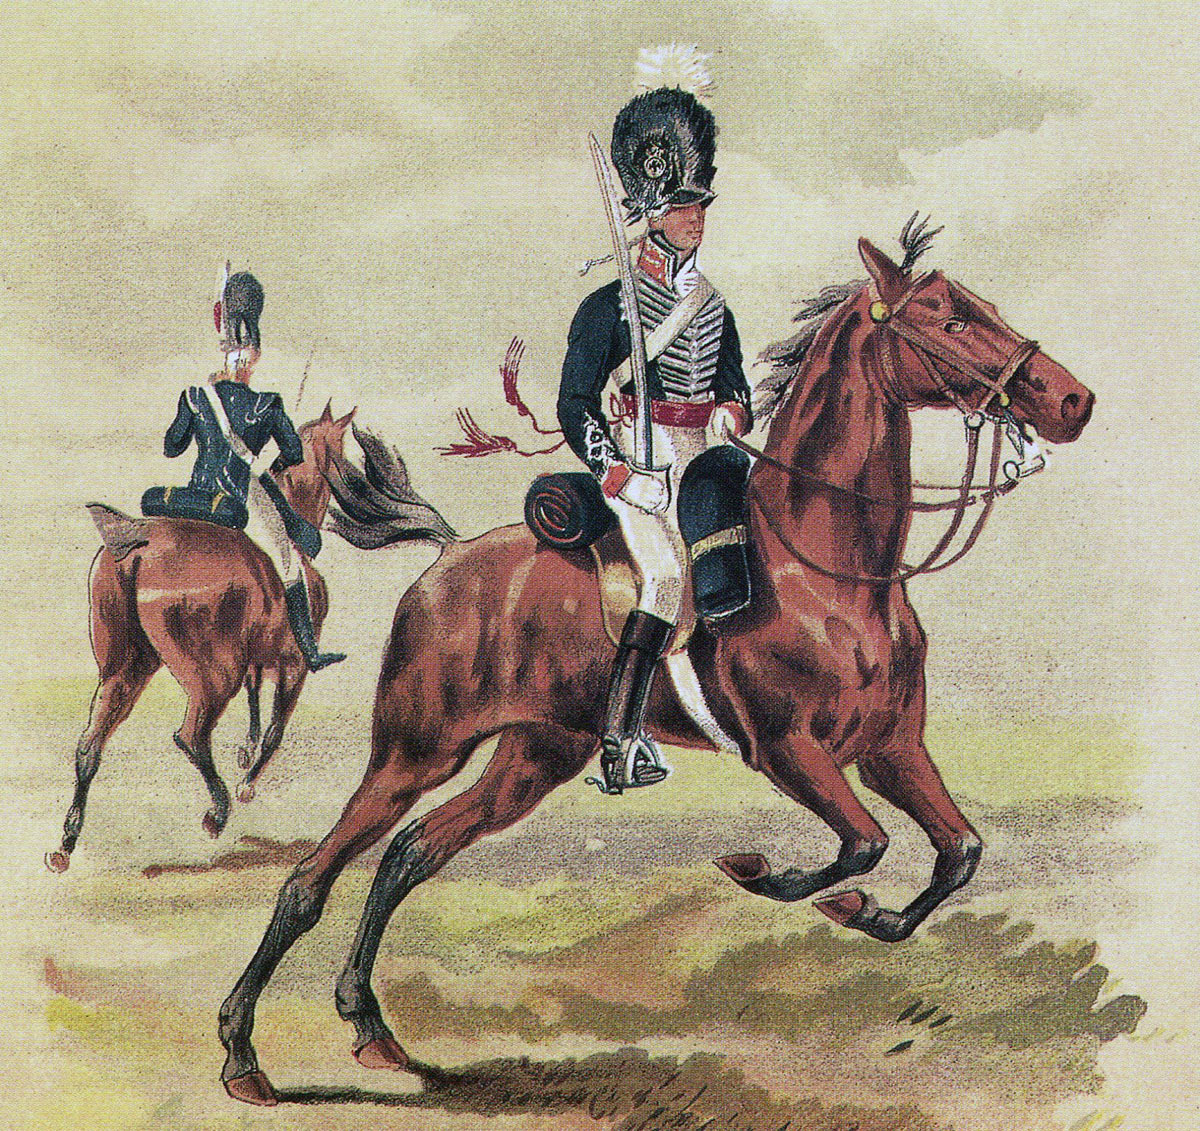 Officers of the 14th Light Dragoons: Battle of the Crossing of the Douro on 16th May 1809 in the Peninsular War